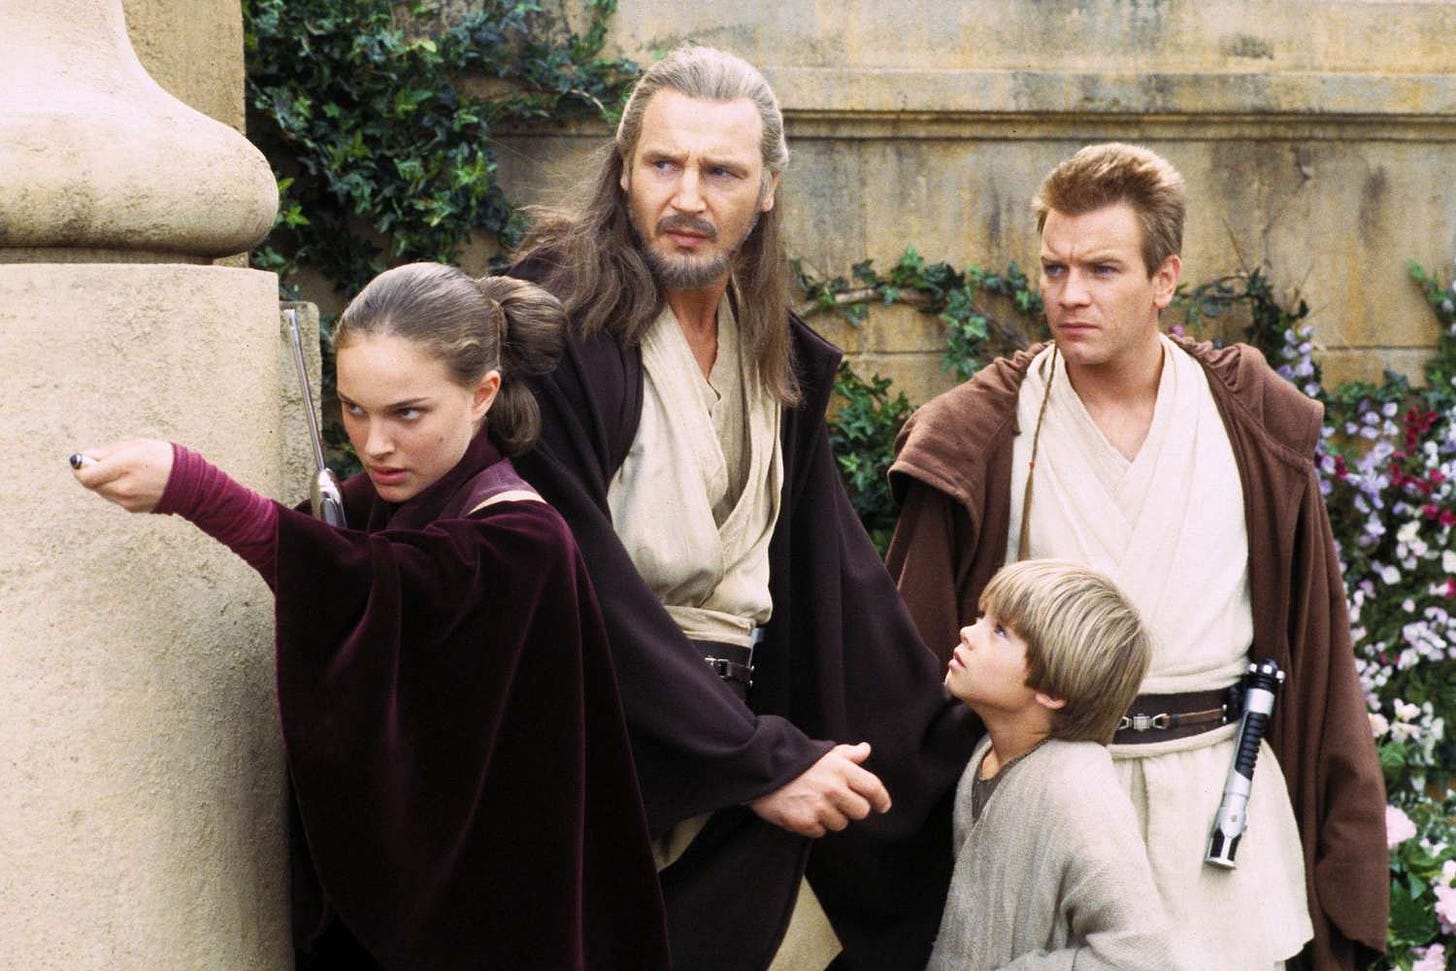 Star Wars rewatch: The Phantom Menace and its never-ending influence